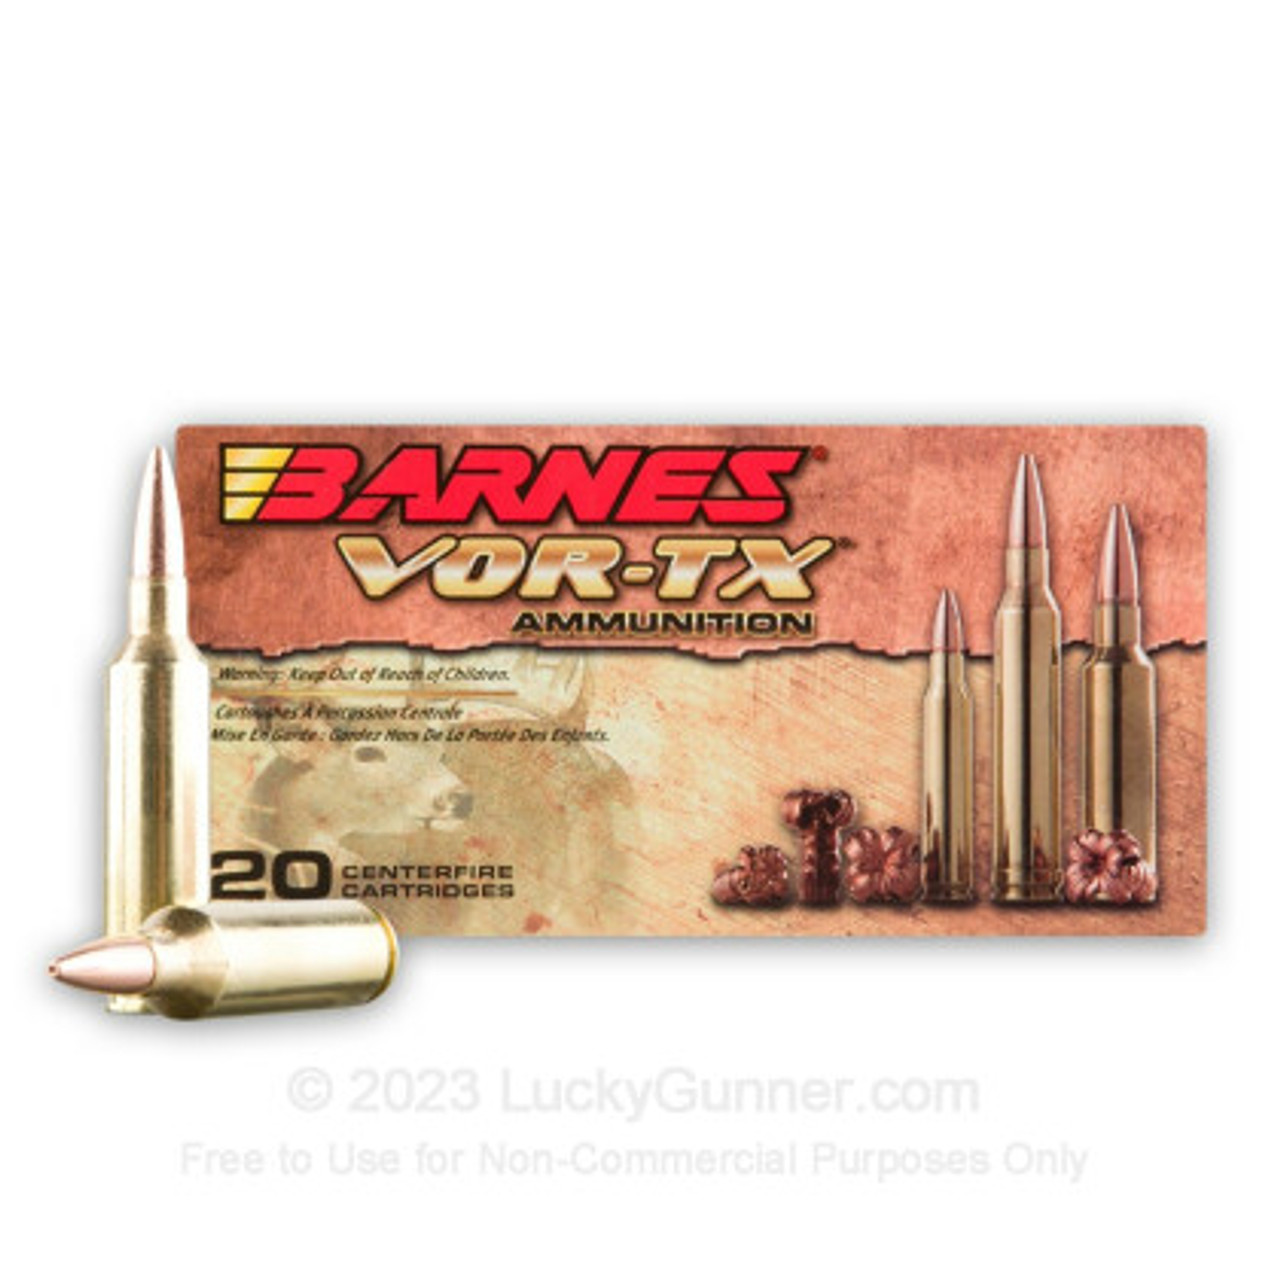 Barnes has loaded their top selling hunting bullet into this premium 270 WSM cartridge. The TSX BT is designed to be one of the most lethal and reliable hunting bullets on the market. The tapered boat tail aids the accuracy of the bullet making it perfect for long range shots, and its signature four petal expansion pattern causes devastating wound paths for the most humane and efficient kills possible.

Each 270 WSM is loaded in a non-corrosive, Boxer-primed brass casing that is reloadable. These bullets leave the barrel at a stunning 3135 fps, and will bring your prey down with superb knockdown power. Another great feature about the Barnes TSX bullet is it is made with 100% copper which translates to zero lead fouling and a cleaner shooting experience.

Barnes has been a trailblazer the ammunition market for decades, and their continued devotion to innovation and improvement makes them a go-to supplier for many hunters. Make sure you have Barnes ammo that wont let you down, and pick up 20 rounds of this 270 WSM ammo today!

Manufacturer	Barnes
Condition	New
Bullet Weight	140 Grain
Bullet Type	Triple-Shock X
Ammo Casing	Brass
Quantity	20
Ammo Caliber	.270 Winchester Short Magnum
Manufacturer SKU	21559
Primer Type	Boxer
Muzzle Velocity (fps)	3135
Muzzle Energy (ft lbs)	3056

Use Type
 